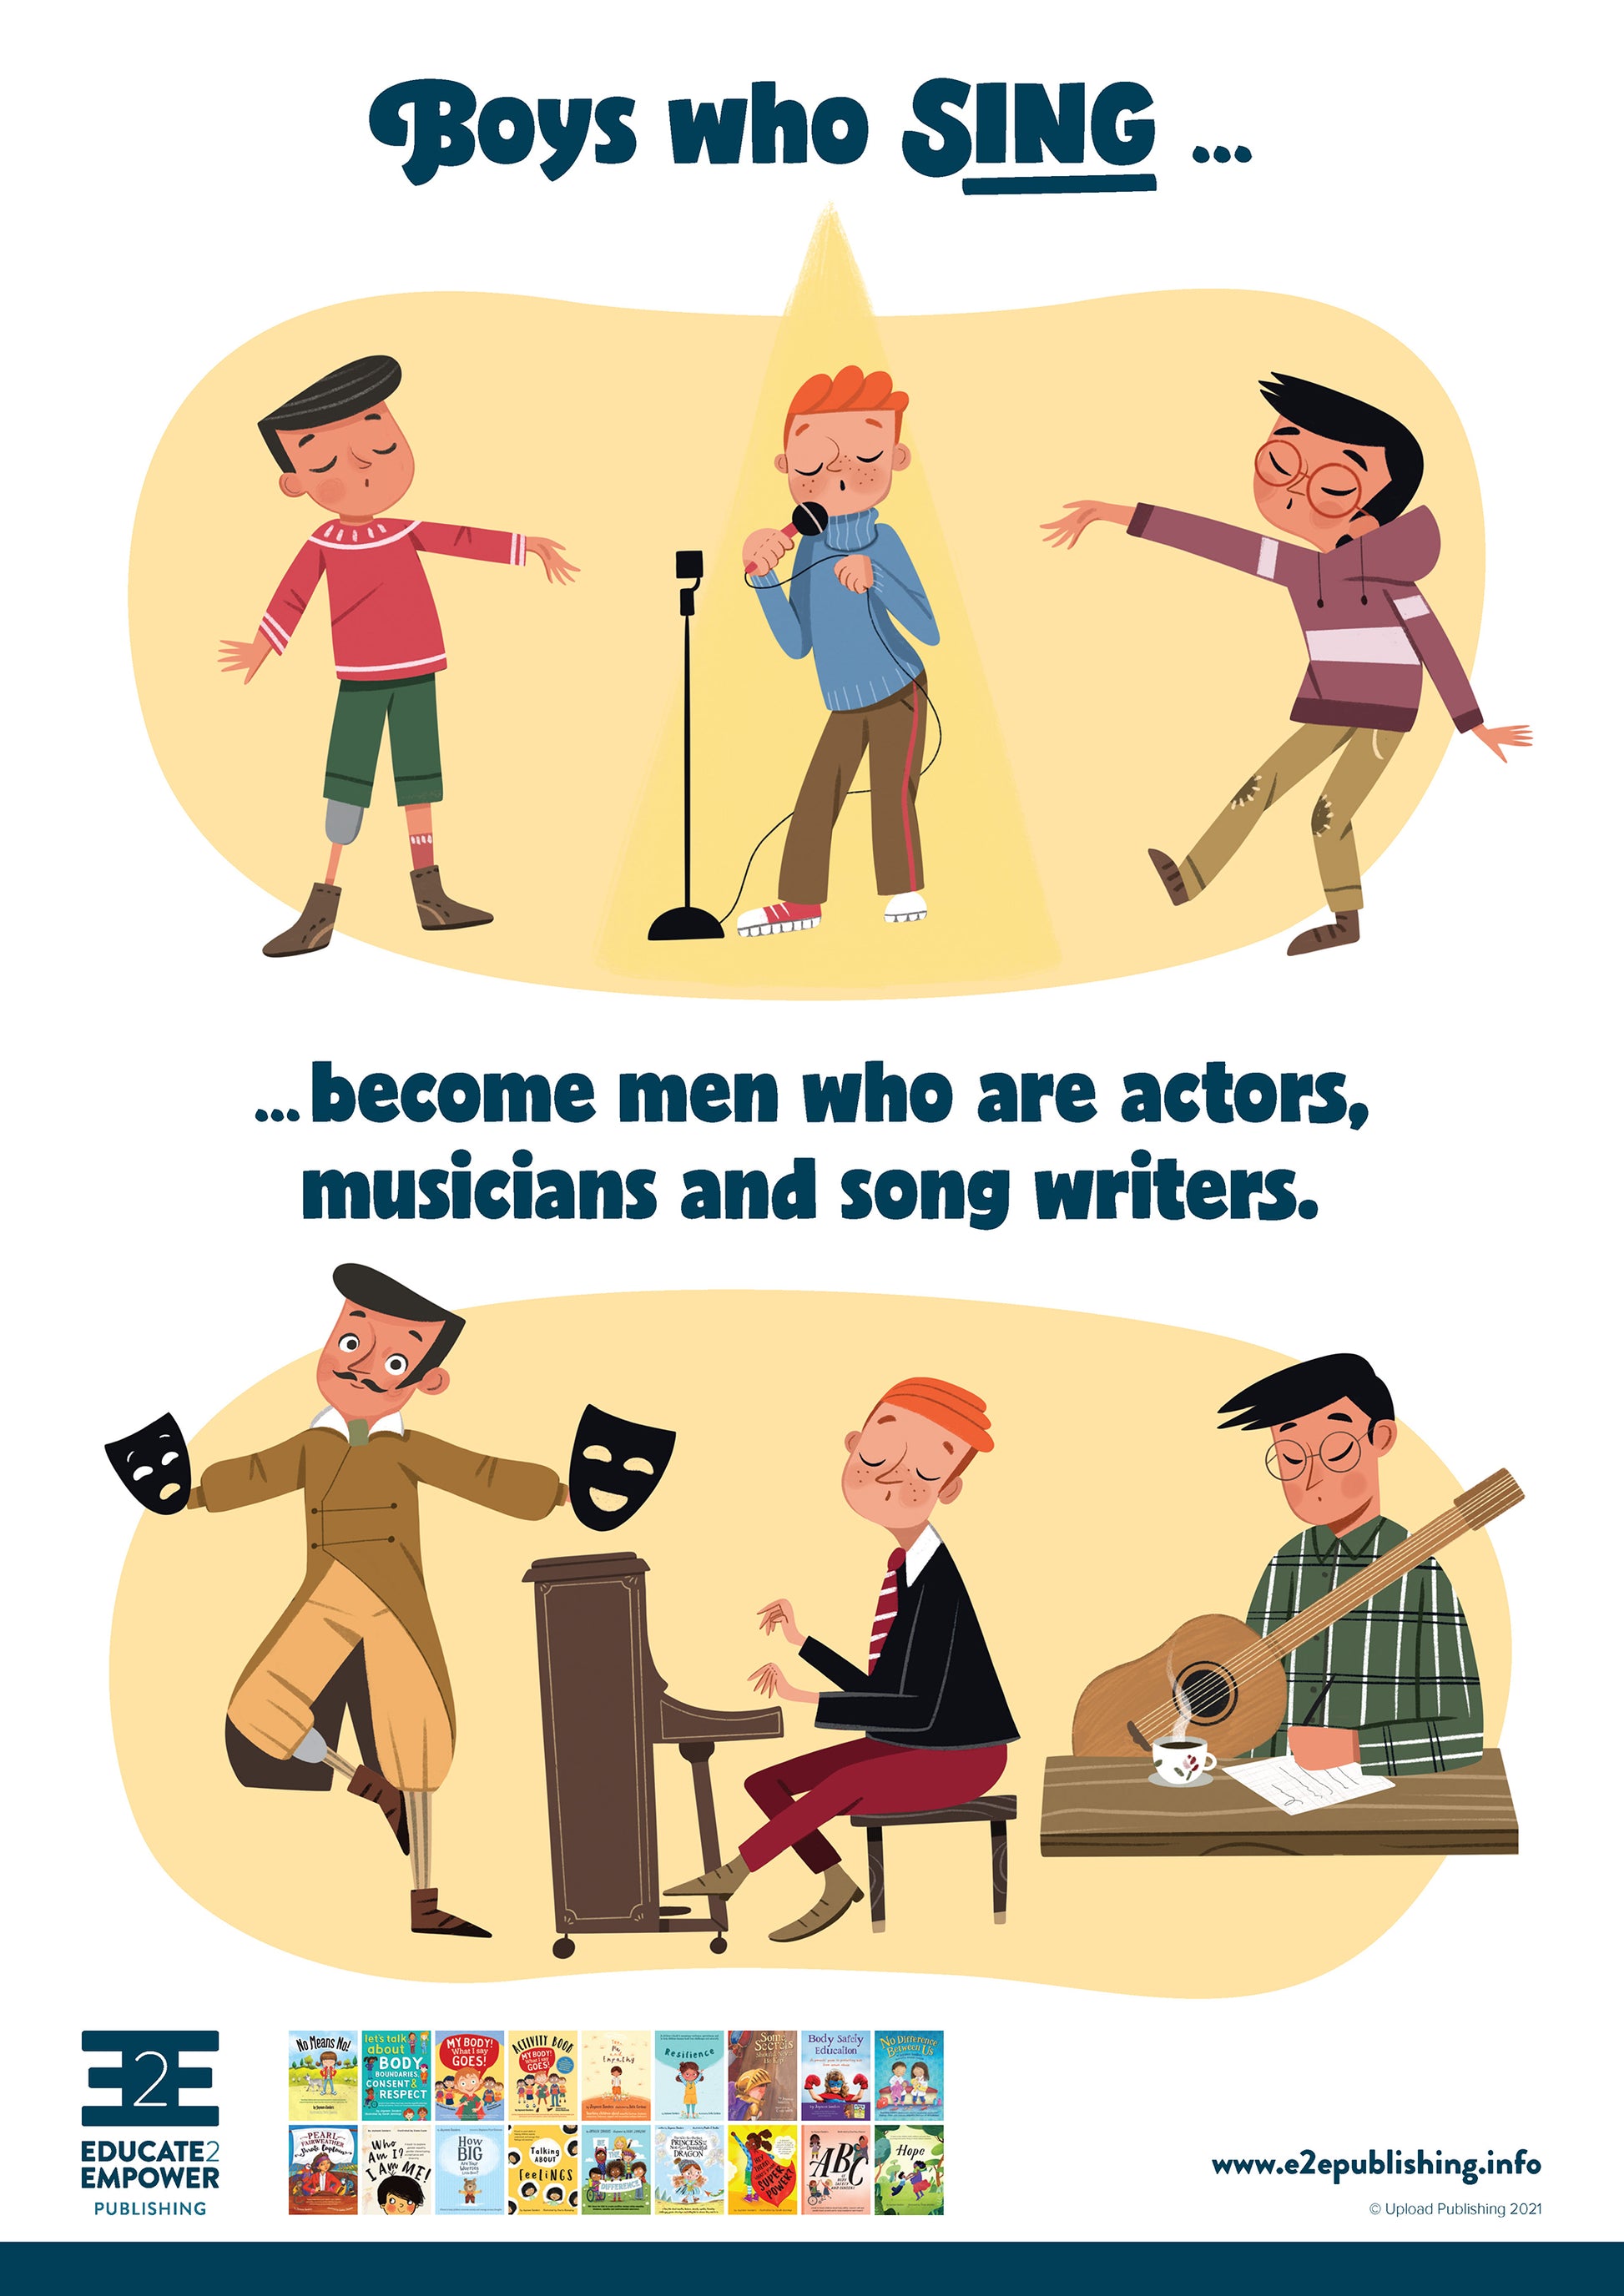 A poster for children titled 'Boys who sing... become men who are actors, musicians and song writers. This is accompanied by a cartoon image of three young boys acting, singing and dancing. Below this the same three boys, as adults, are pursuing careers in acting and music.